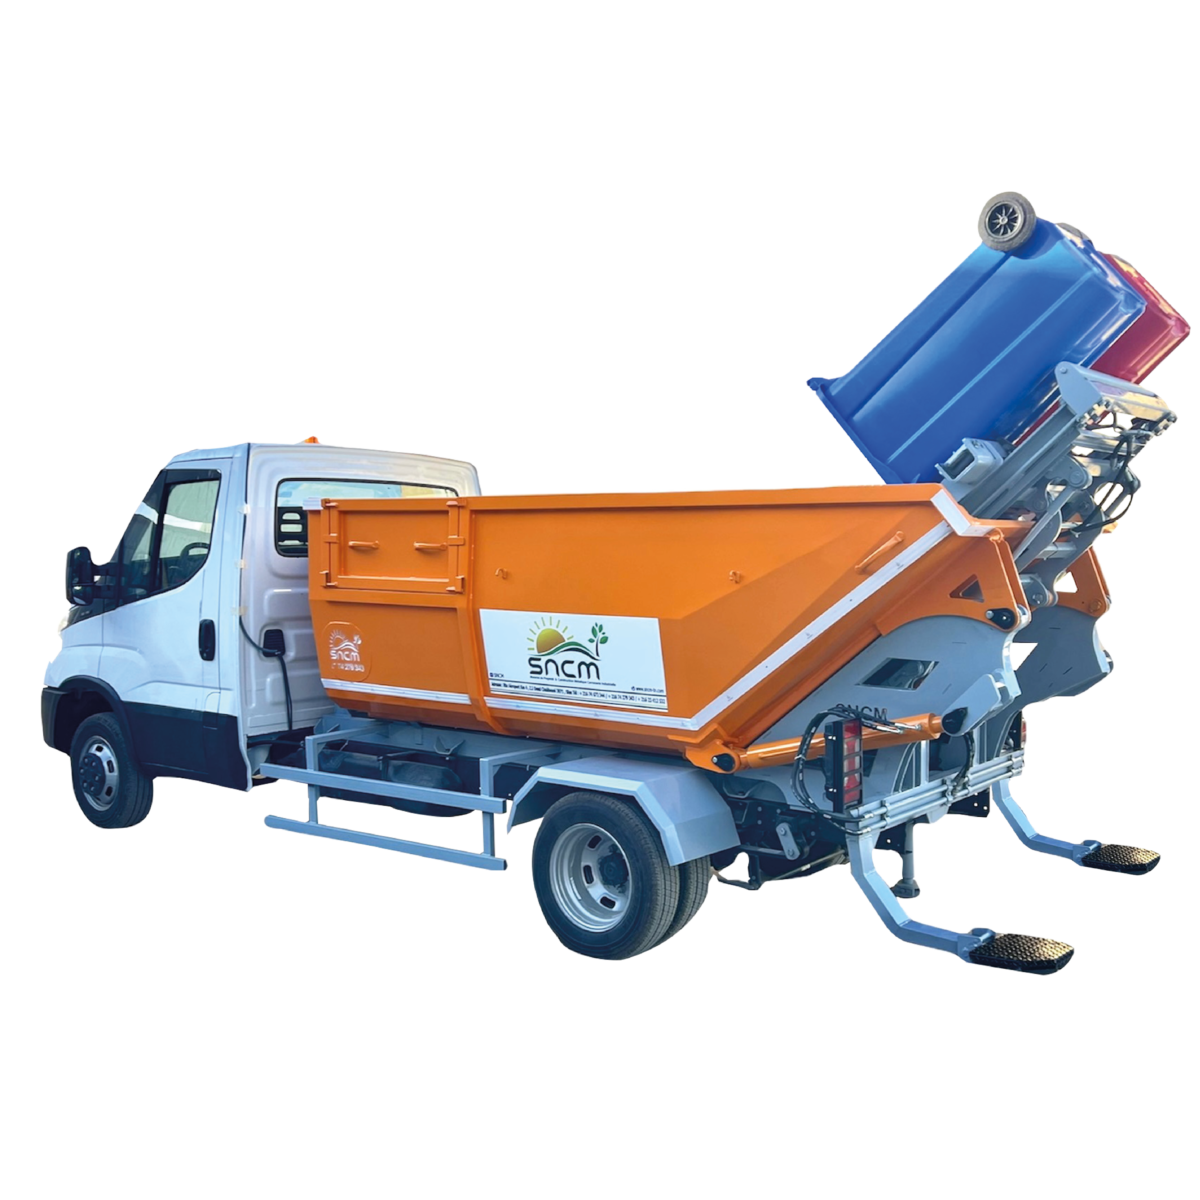 Satellite Dump Truck 5m3 à 7m3 with container universel system